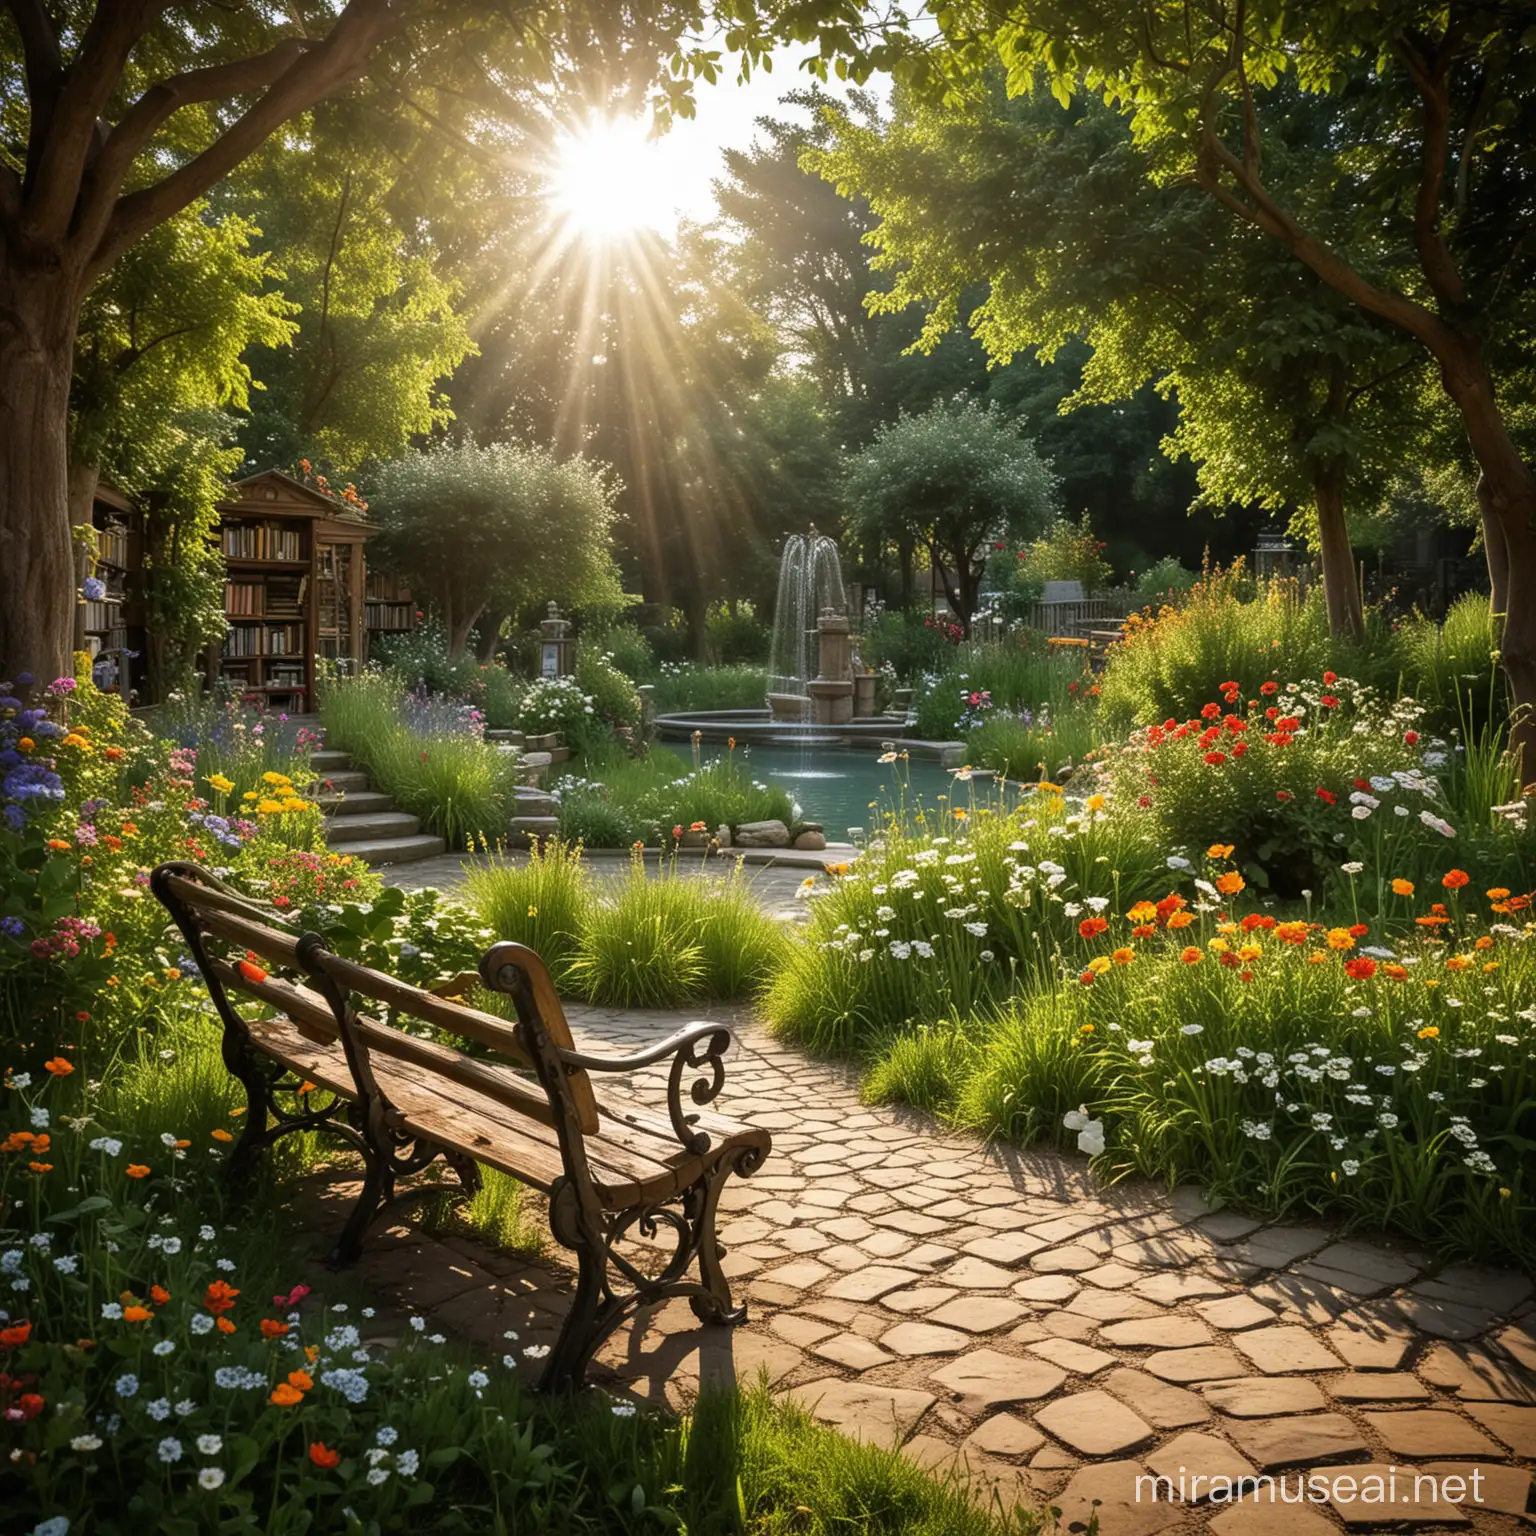 Tranquil Garden Library with Blooming Flowers and Fluttering Butterflies